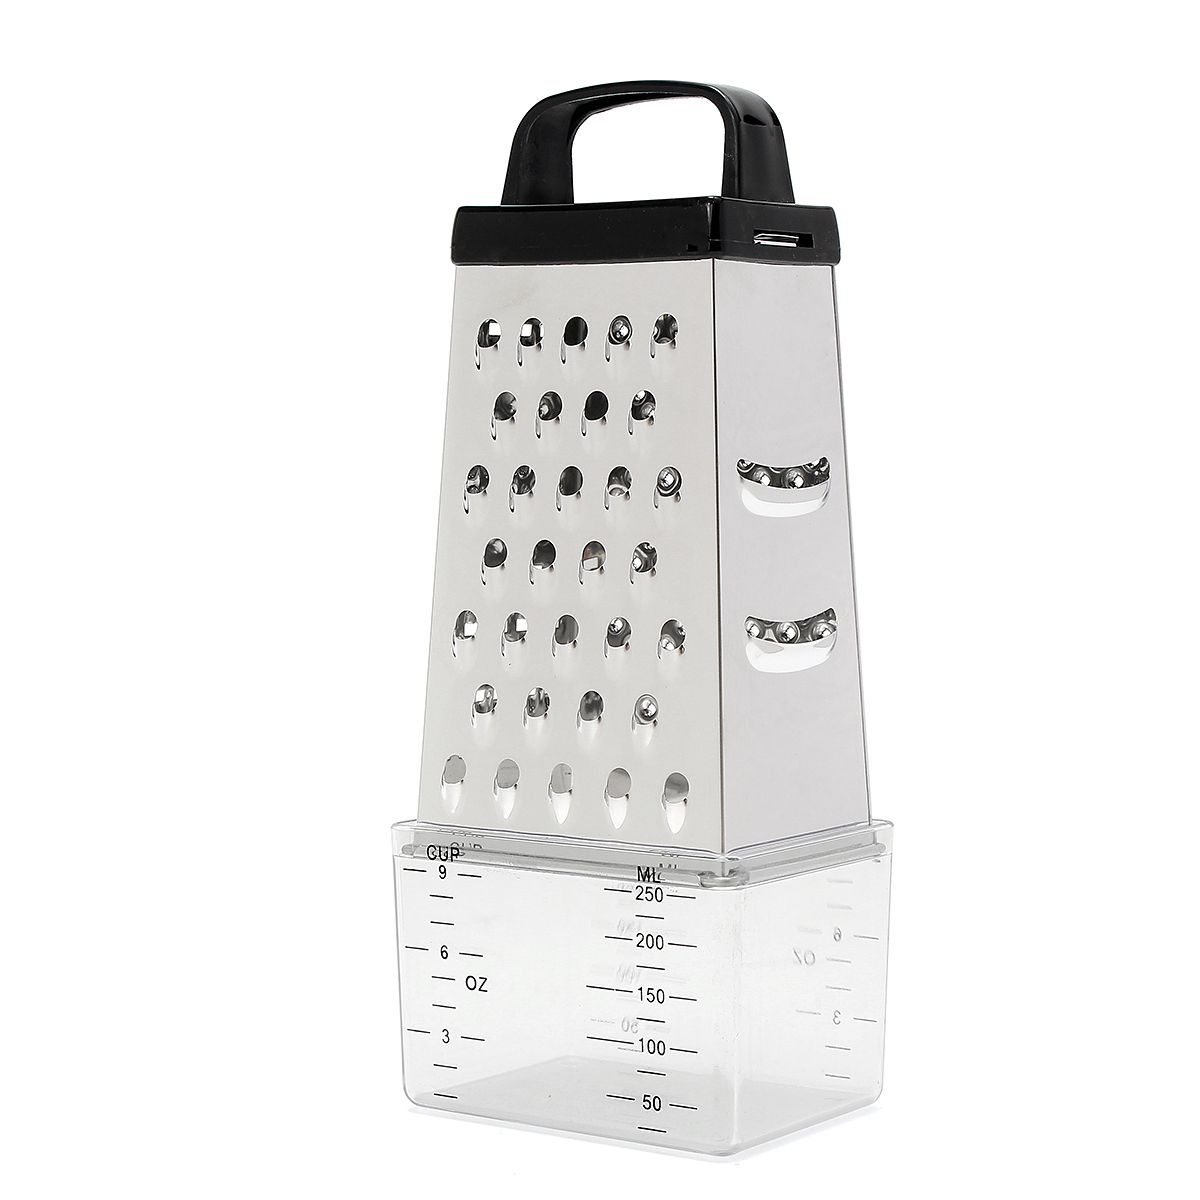 Grater-Box-Stainless-Steel-4-Sided-Multi-Funtion-Cheese-Vegetable-With-Container-Lunch-Box-1304772-2